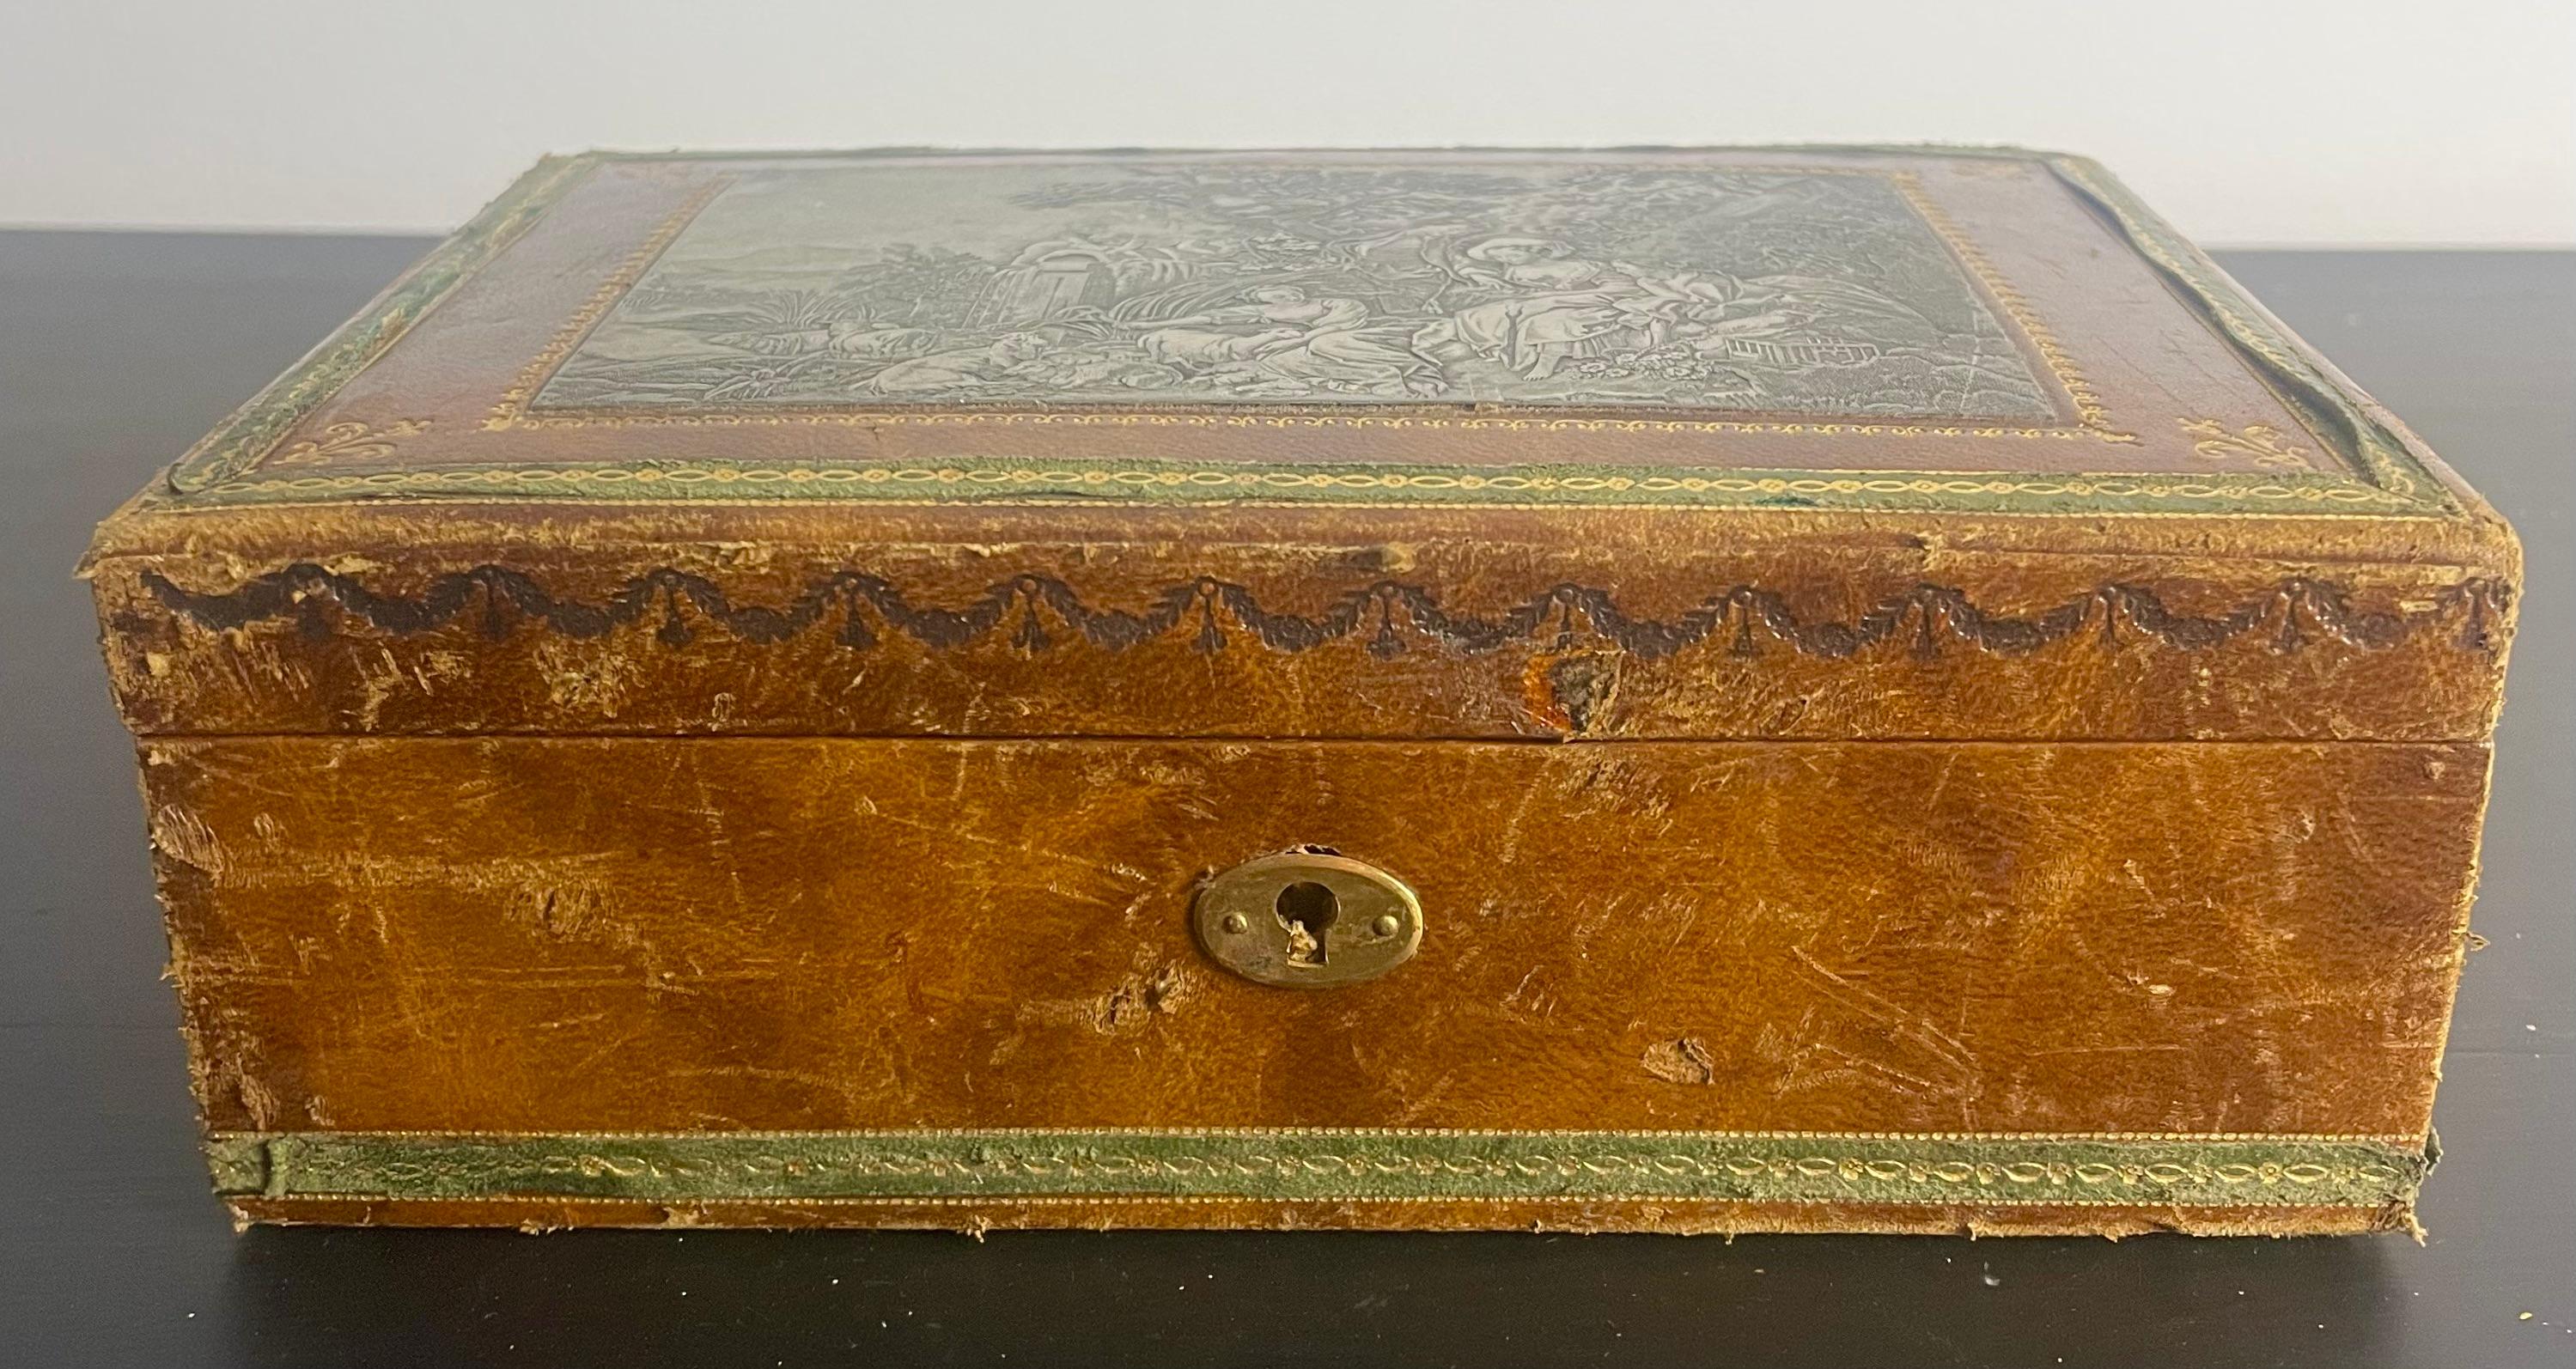 Charming wooden jewelry or sewing box covered in brown leather, surrounded by a dark brown inlaid frieze and a decorative green frieze glued around the box.
The leather is decorated with golden patterns on small irons.
The inside of the box is made